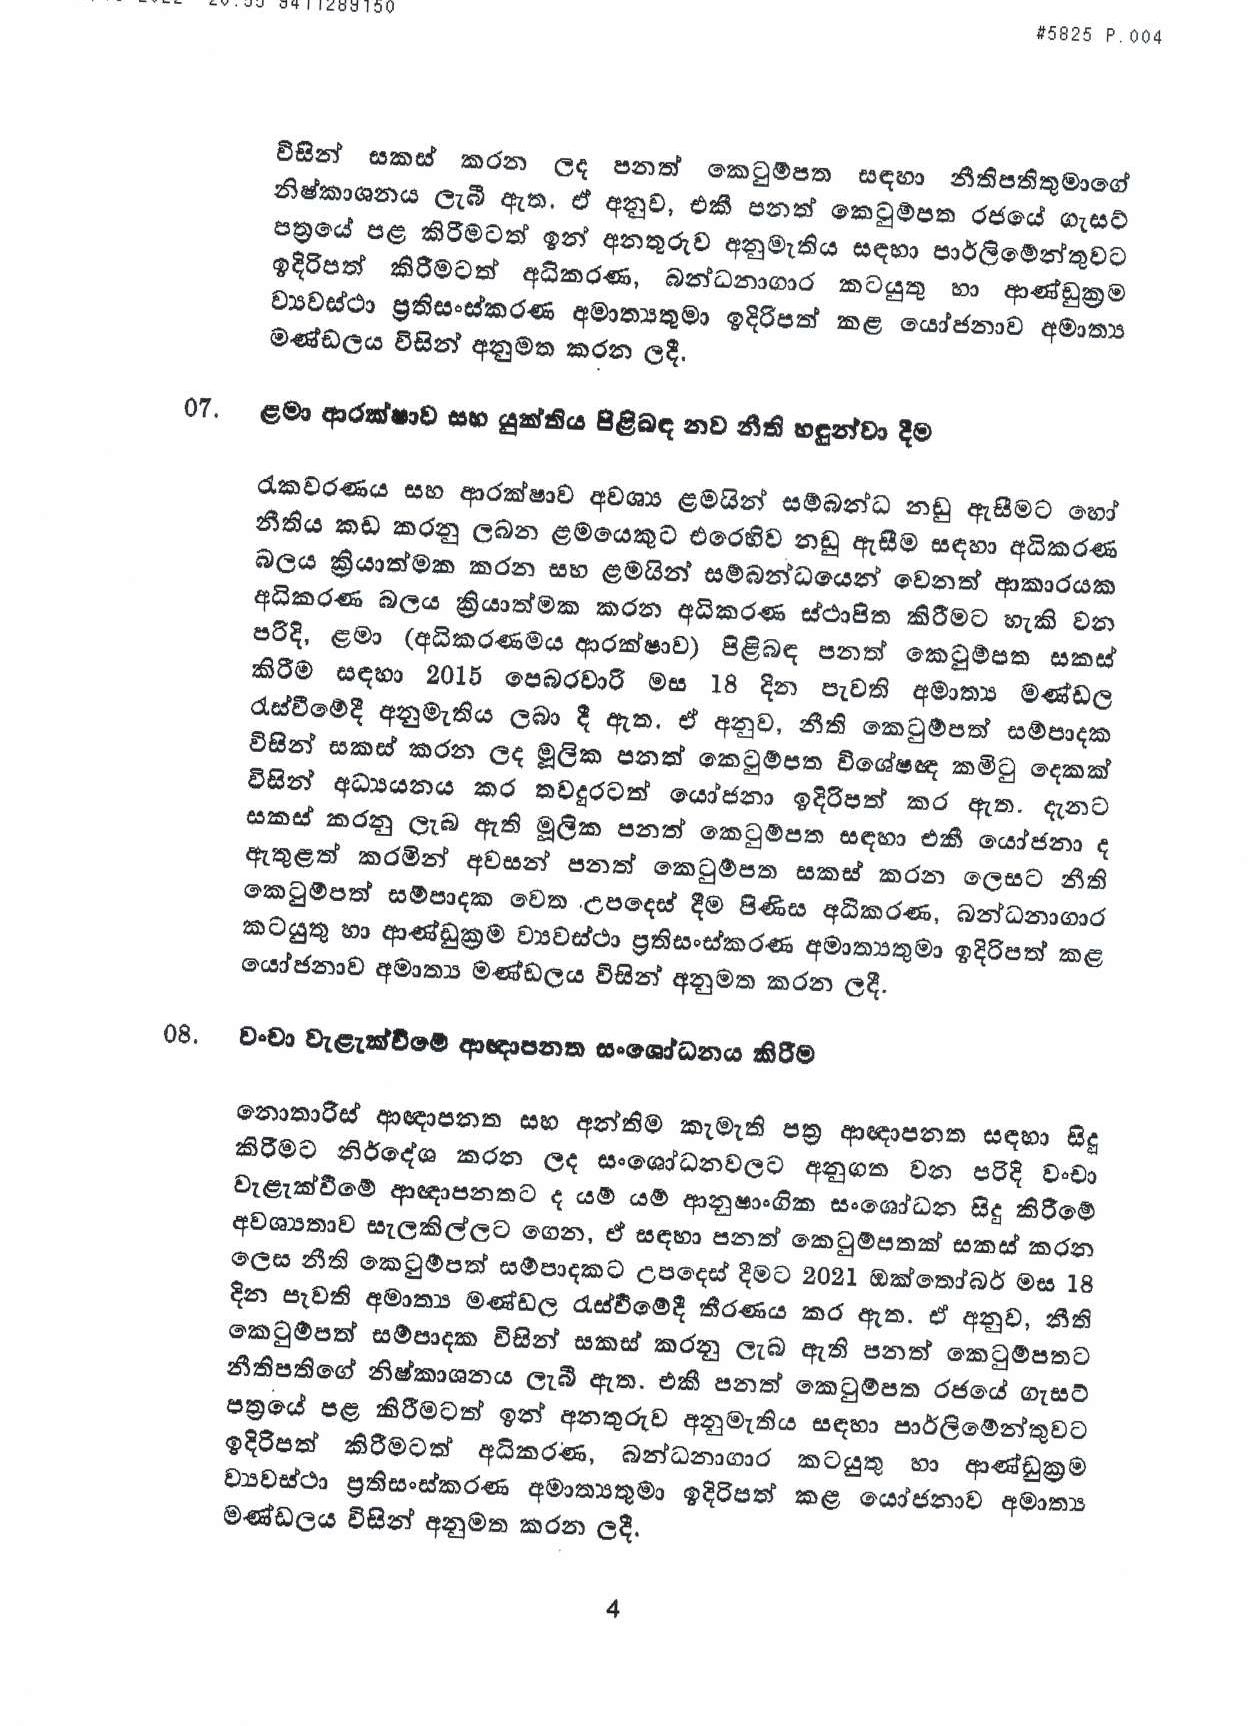 Cabinet Decisions on 27.06.2022 S page 004